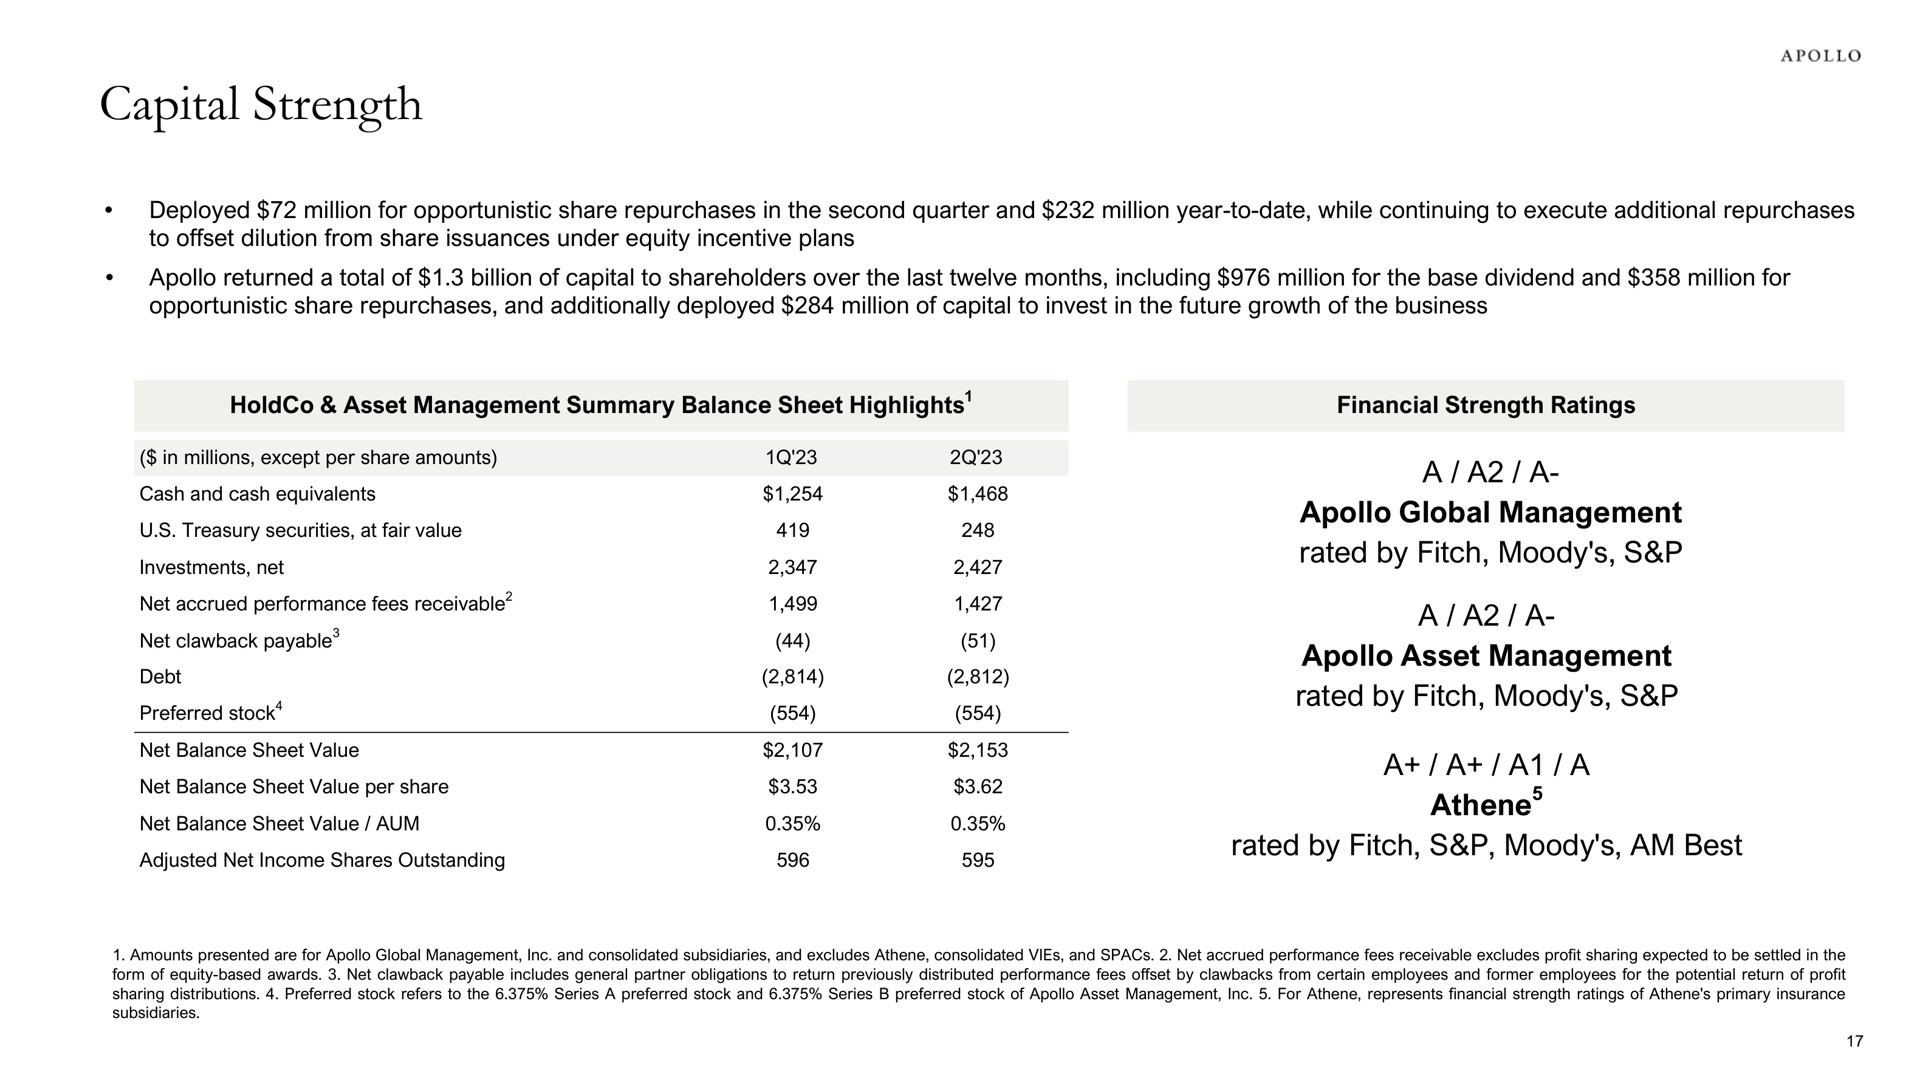 capital strength a a a global management rated by fitch moody a a a asset management rated by fitch moody a a a a rated by fitch moody am best a | Apollo Global Management